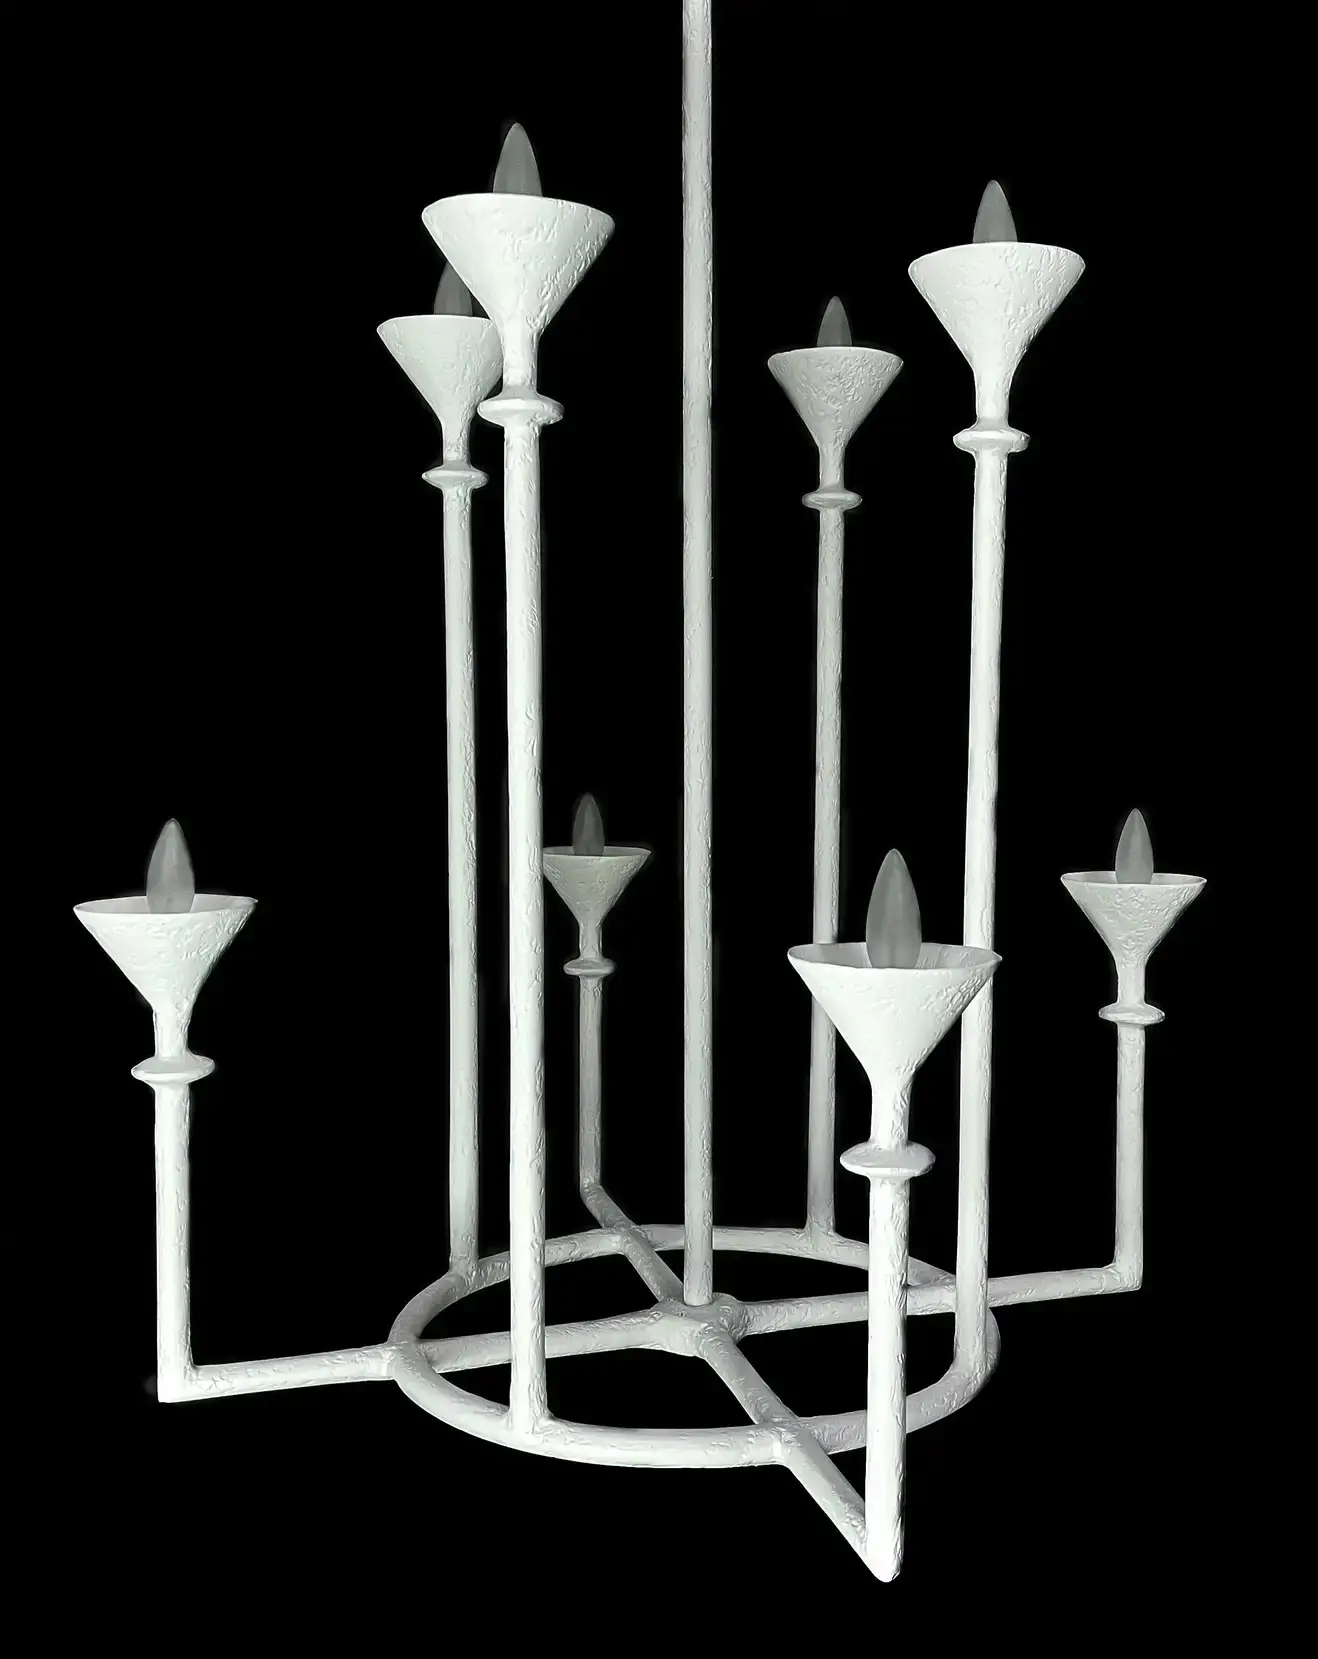 Chandelier VINCENNES WHITE by Bourgeois Boheme Atelier